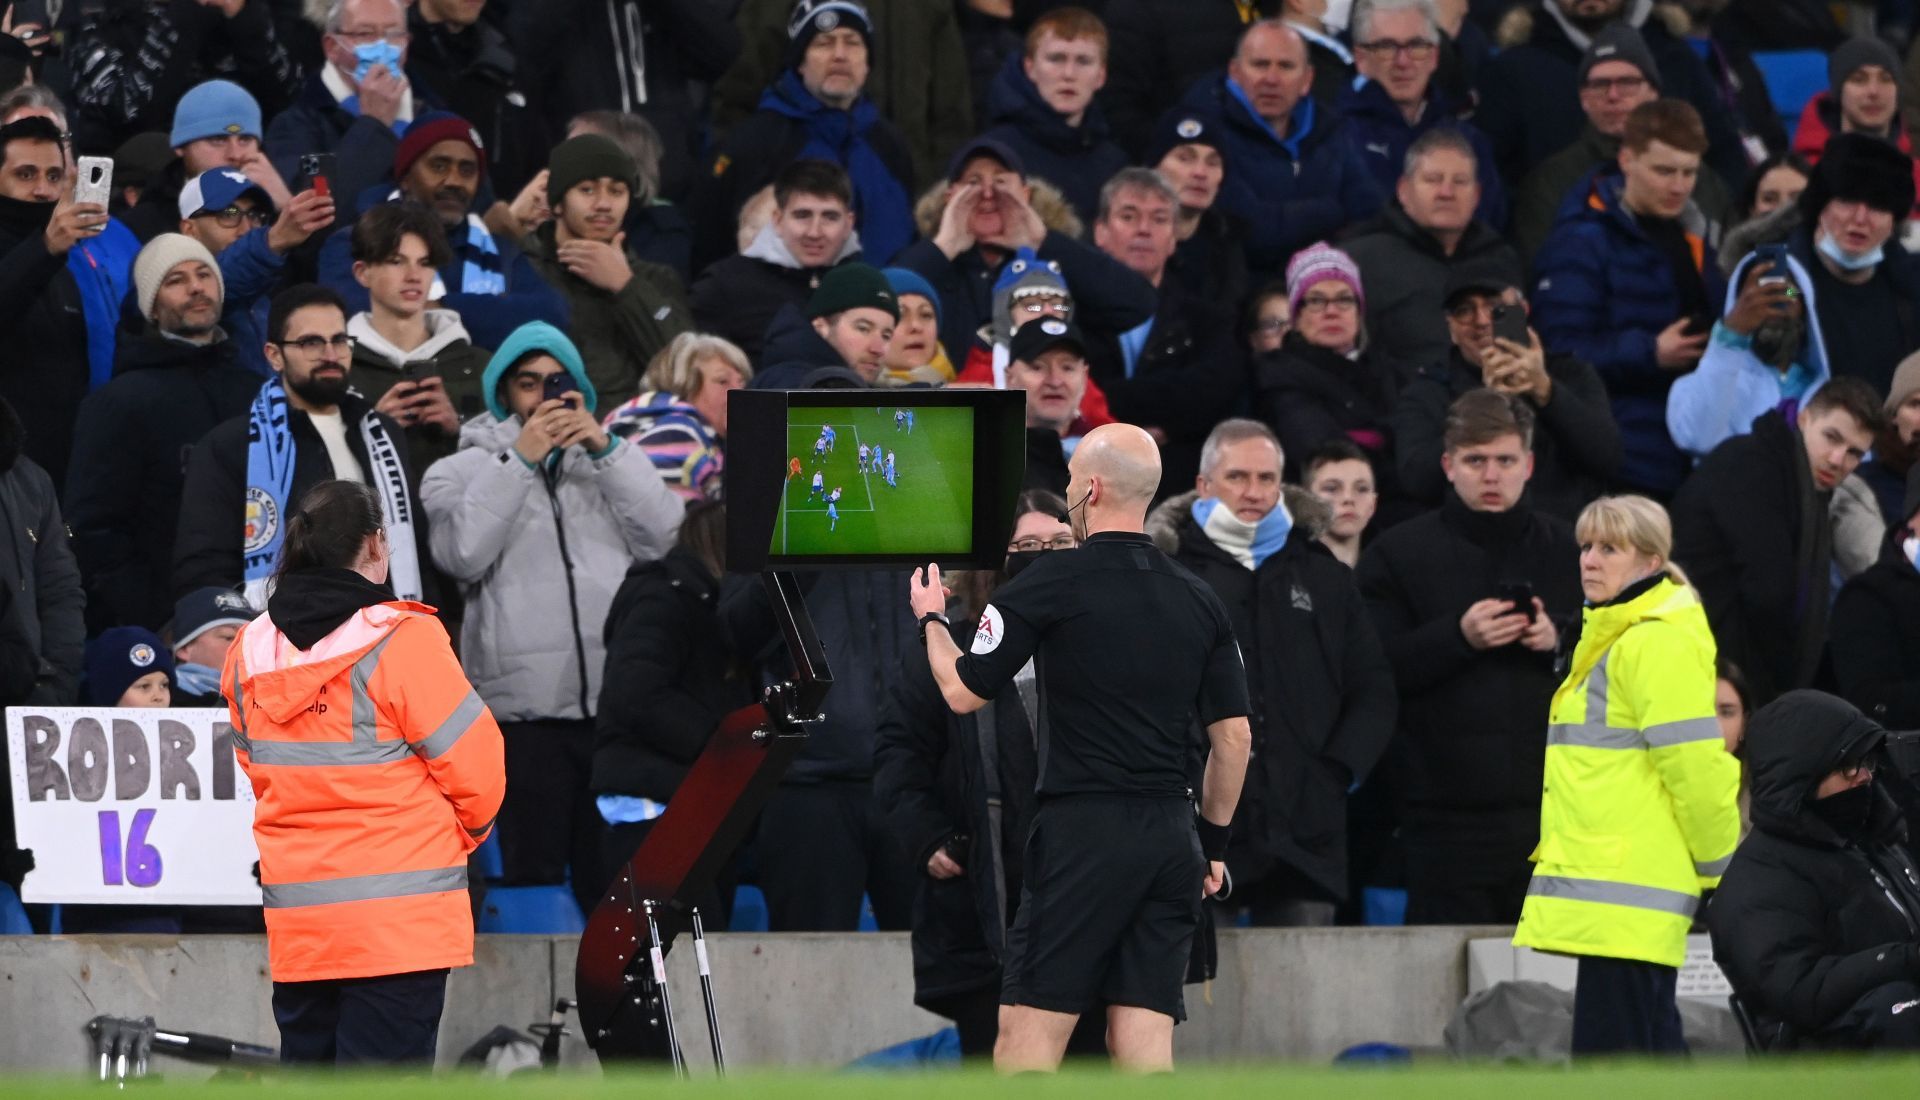 VAR has been a hot topic of debate this season and the incident in the Carabao Cup Final has added to the strong opinions,